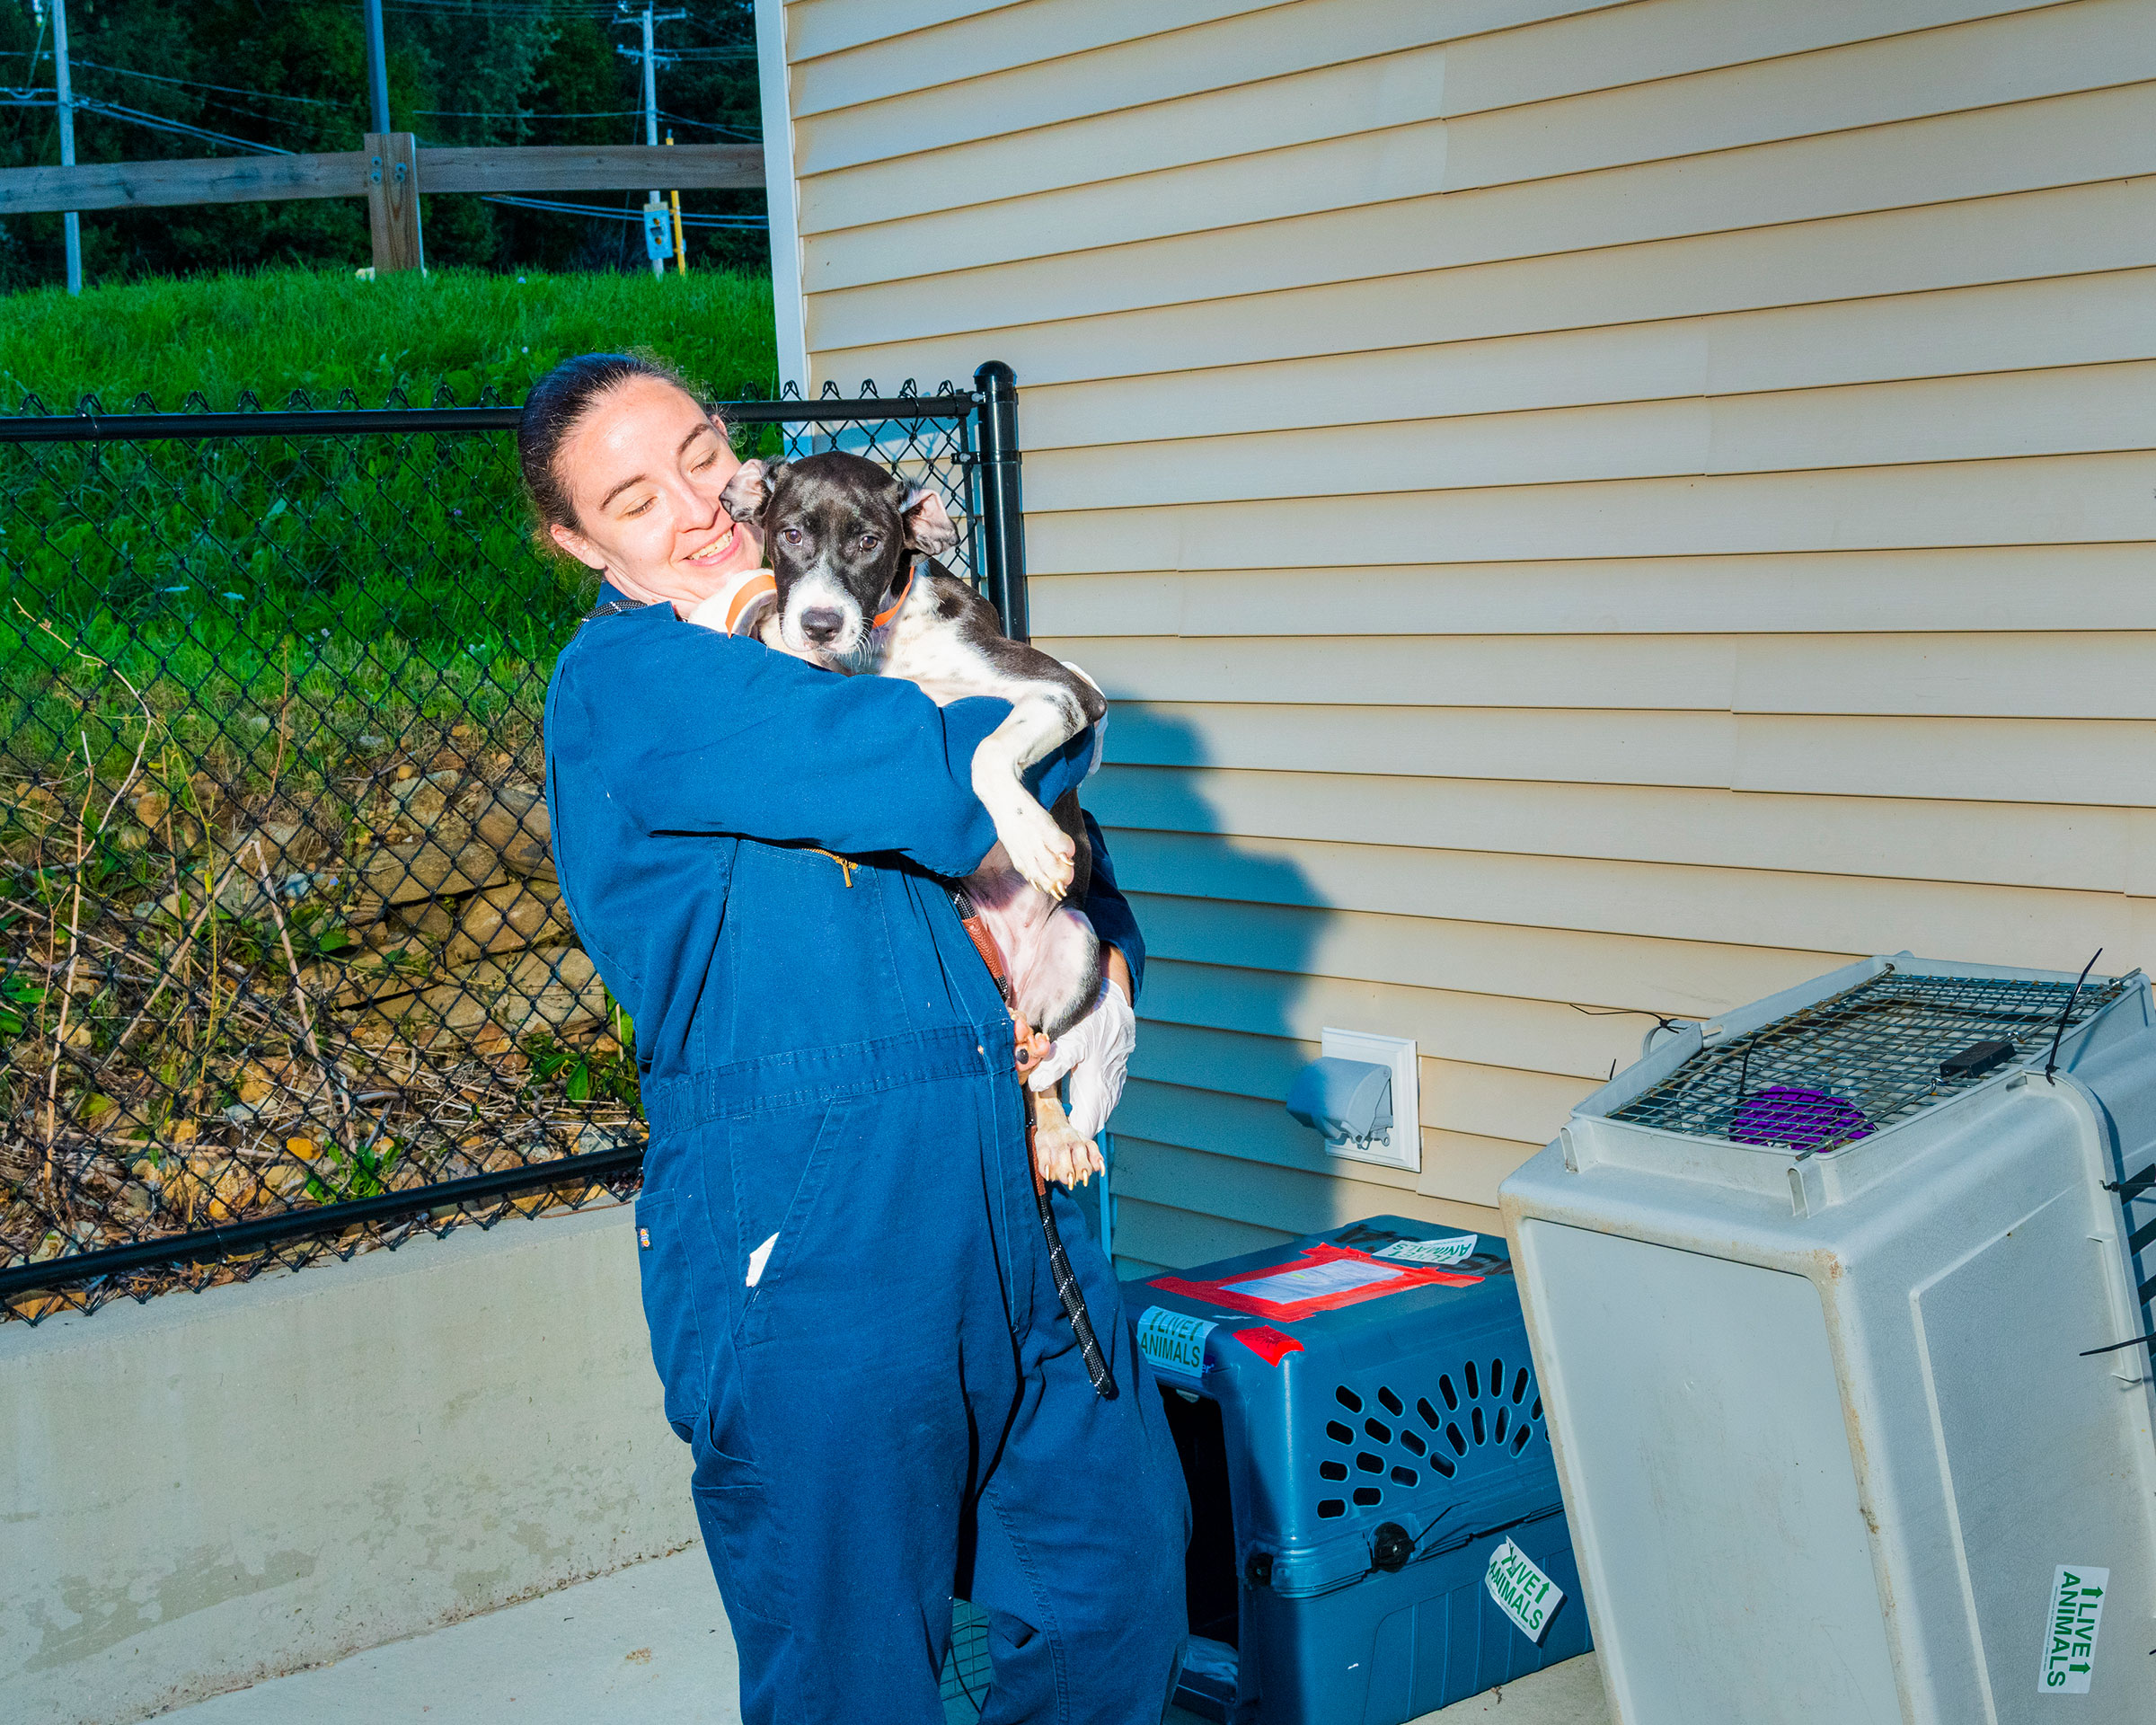 Danielle Bowes, a care and adoption counselor at Second Chance, moves Zelda from the crate she flew in